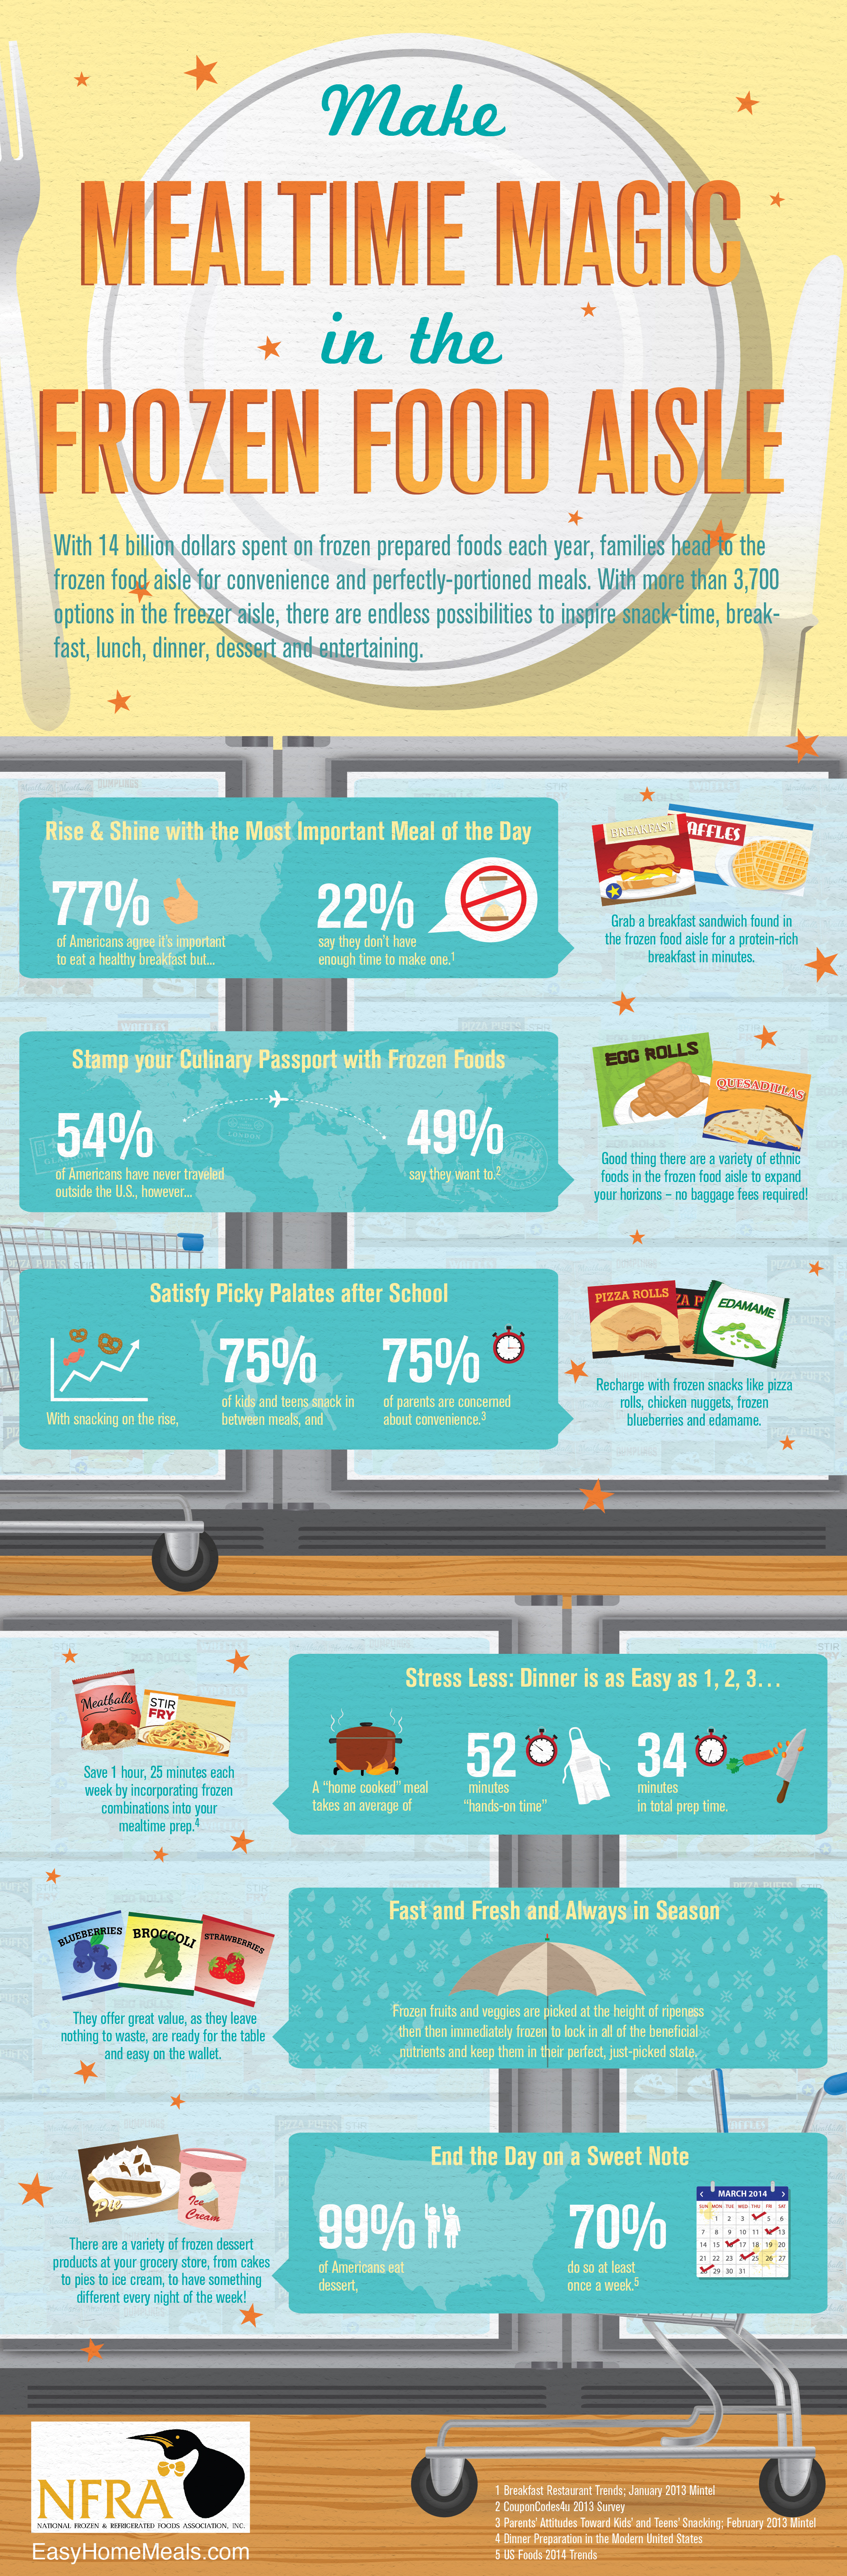 Mealtime Magic Infographic